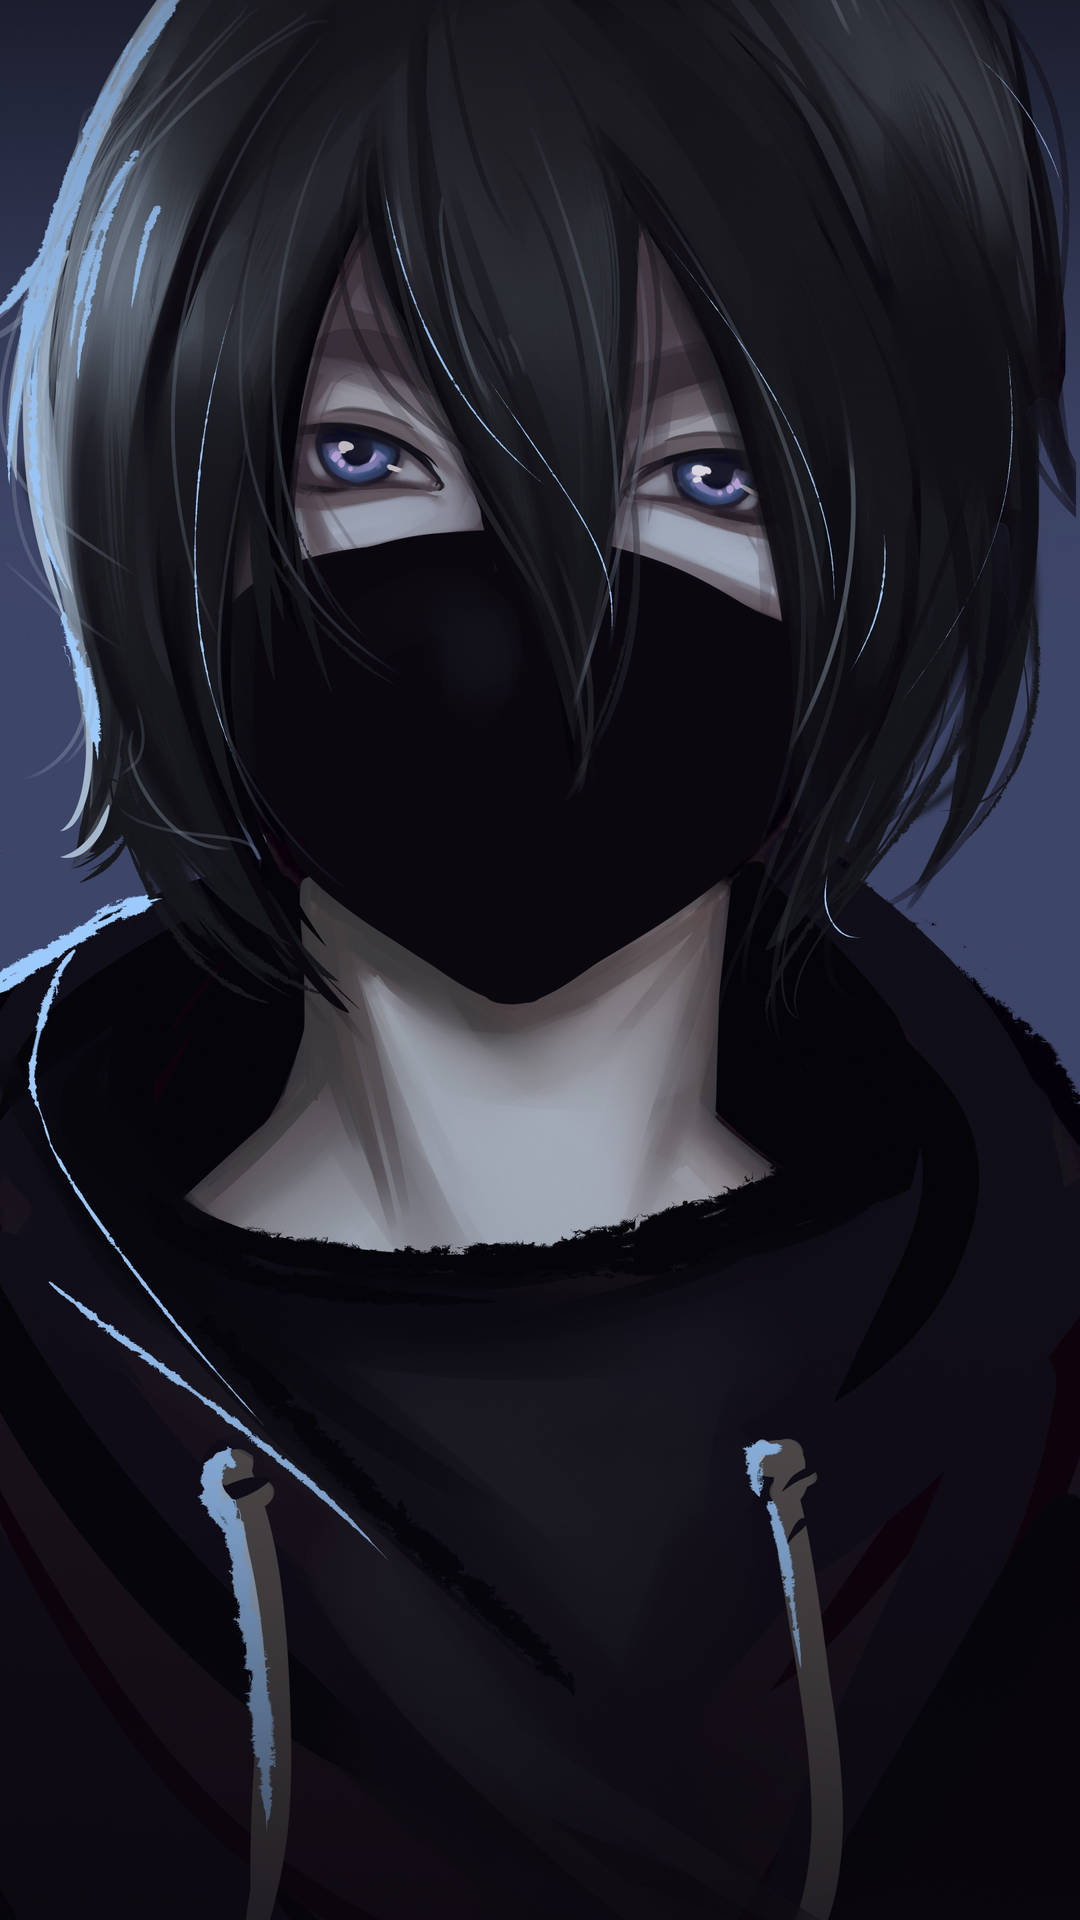 Caption: Mysterious Anime Boy With A Black Mask Background